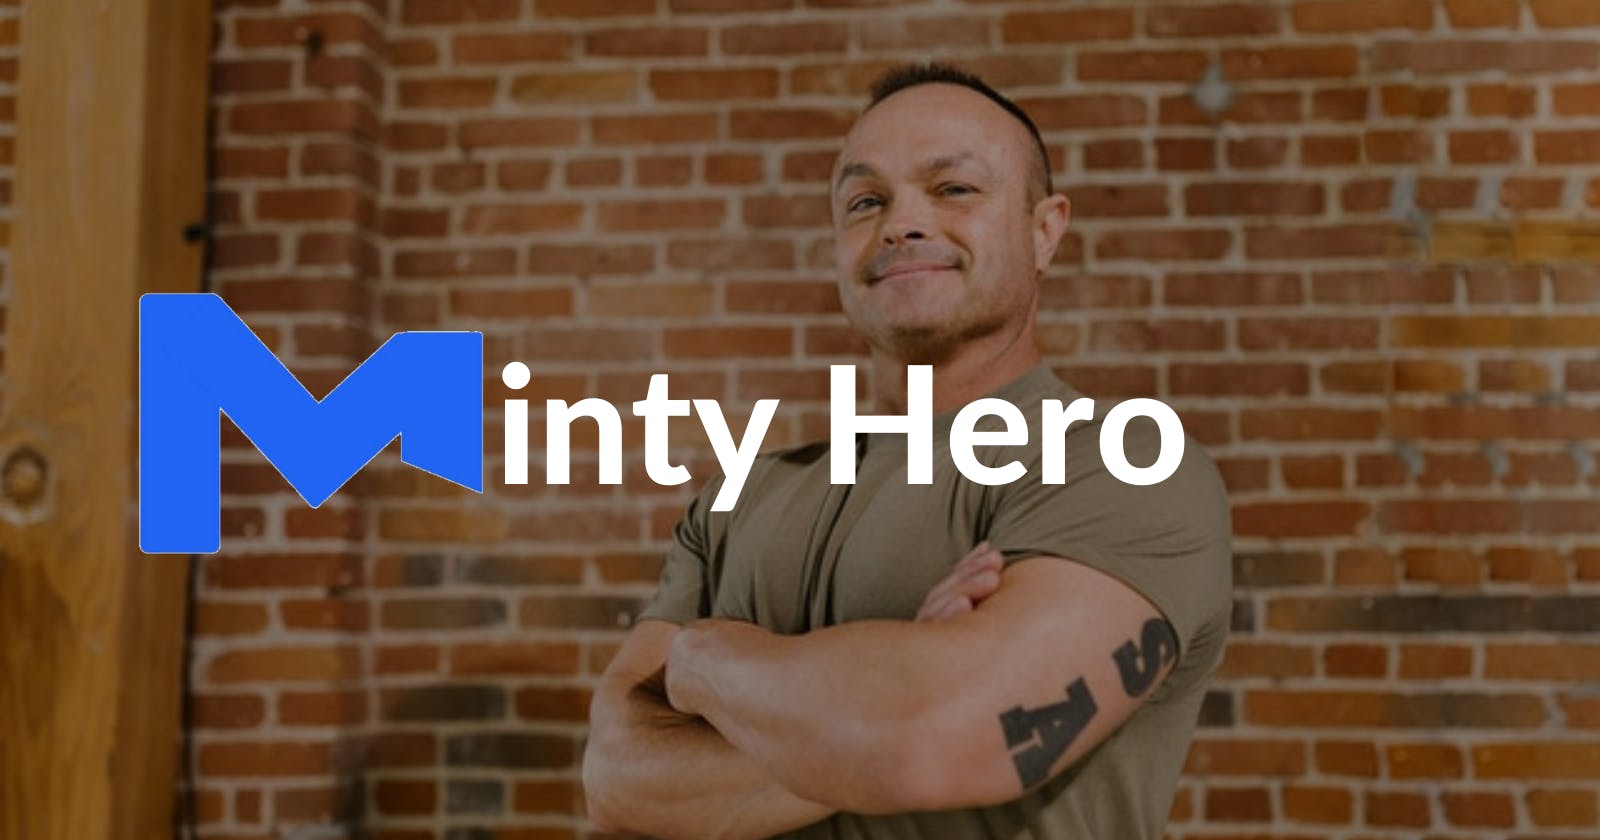 Who is a MintyHero?